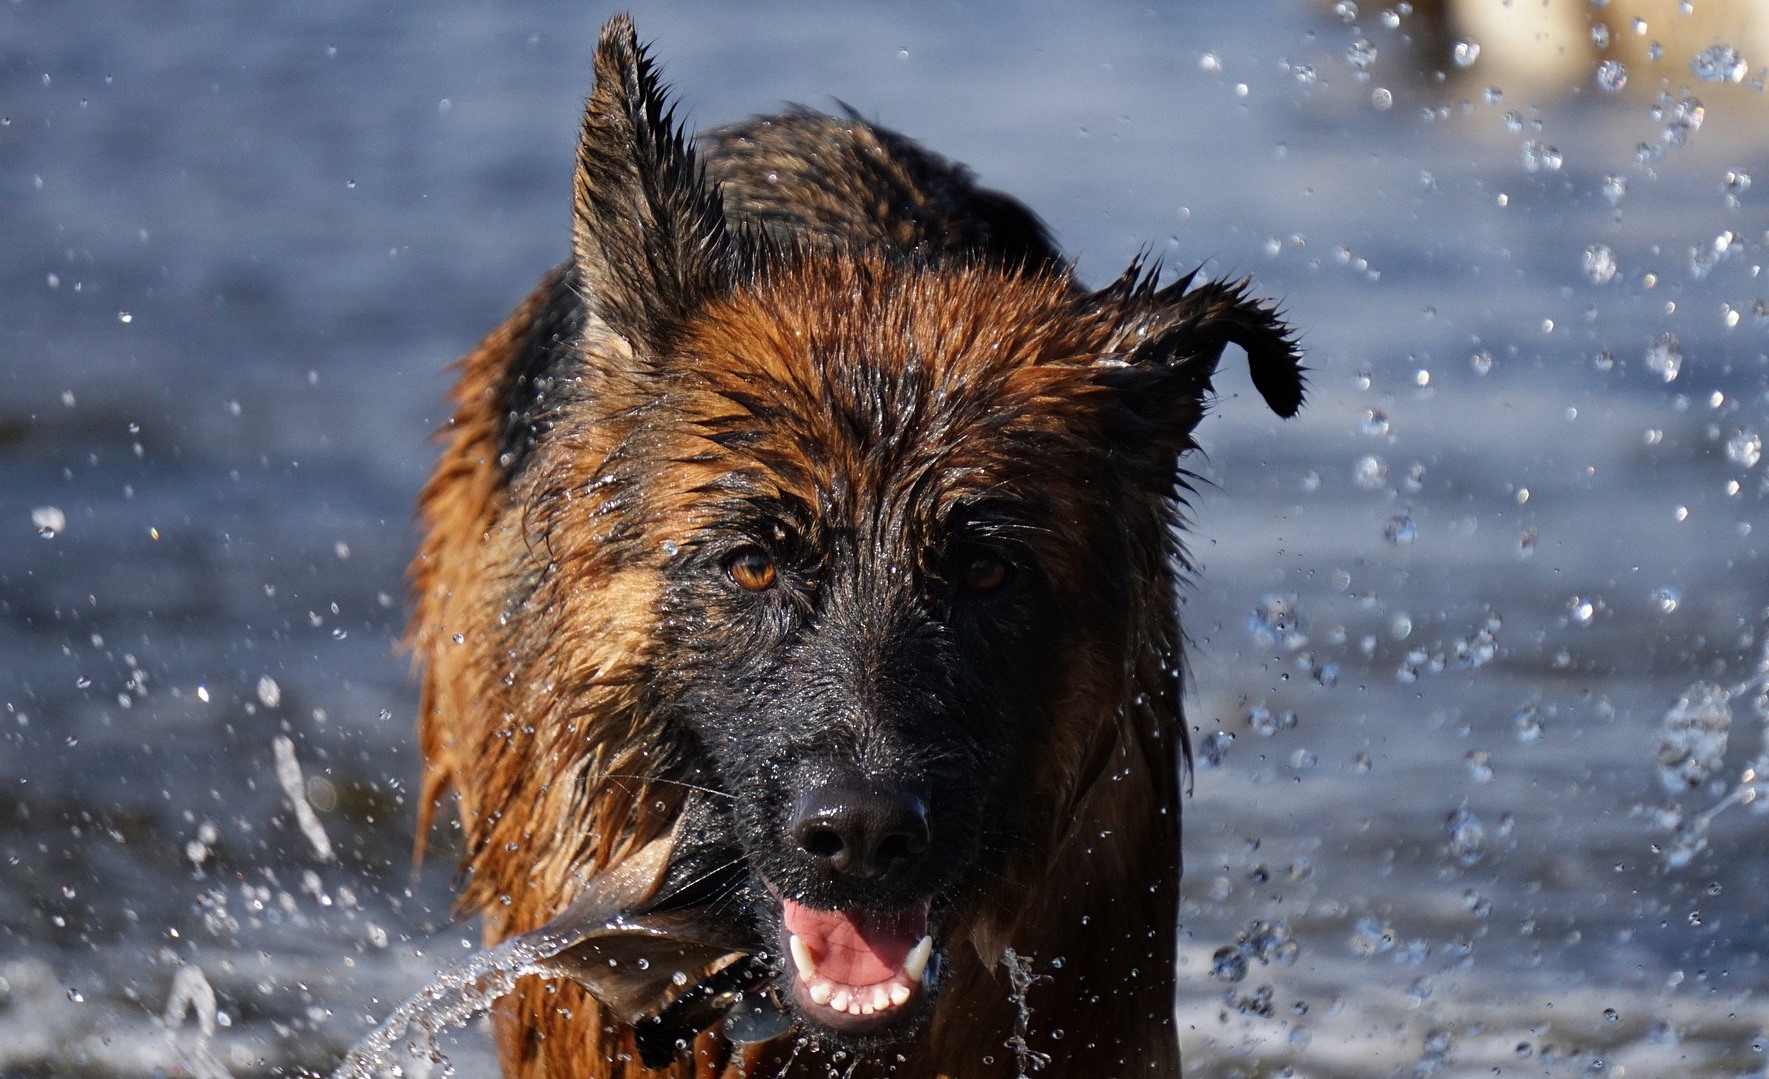 Does Your Hair Smell Like a Wet Dog? » Scary Symptoms